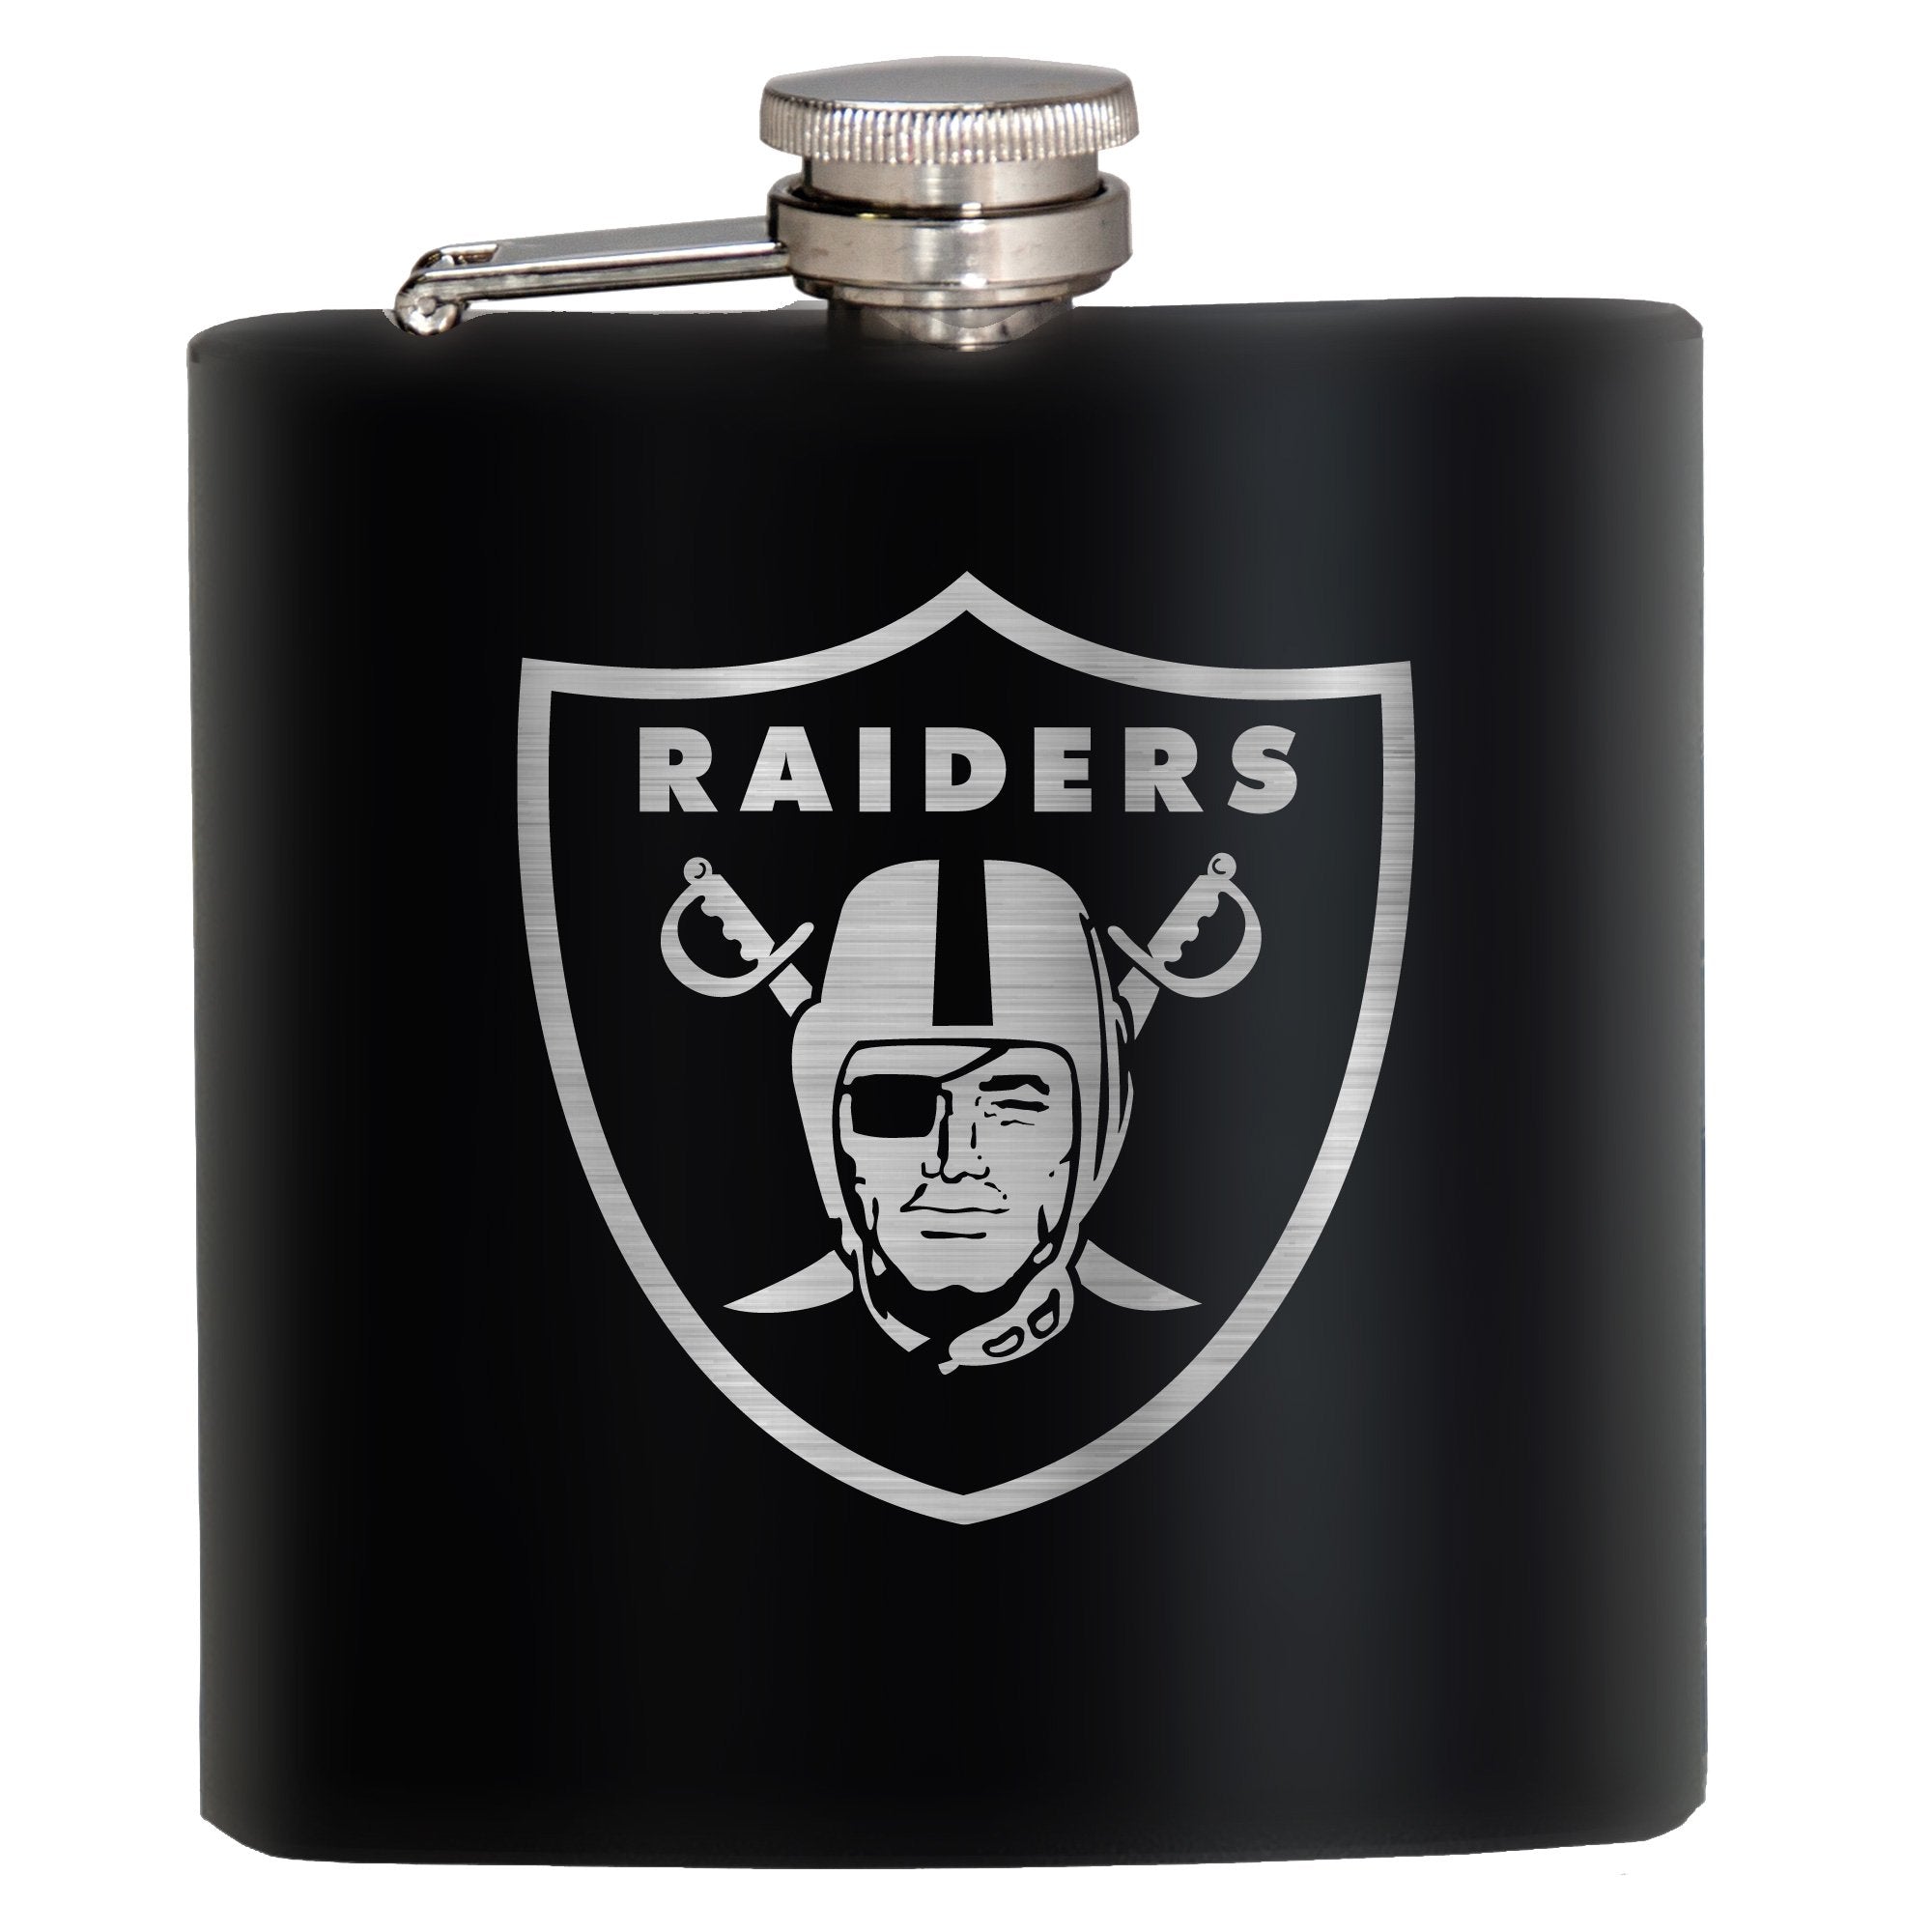 Officially Licensed NFL Team Graphics Thermos - Raiders